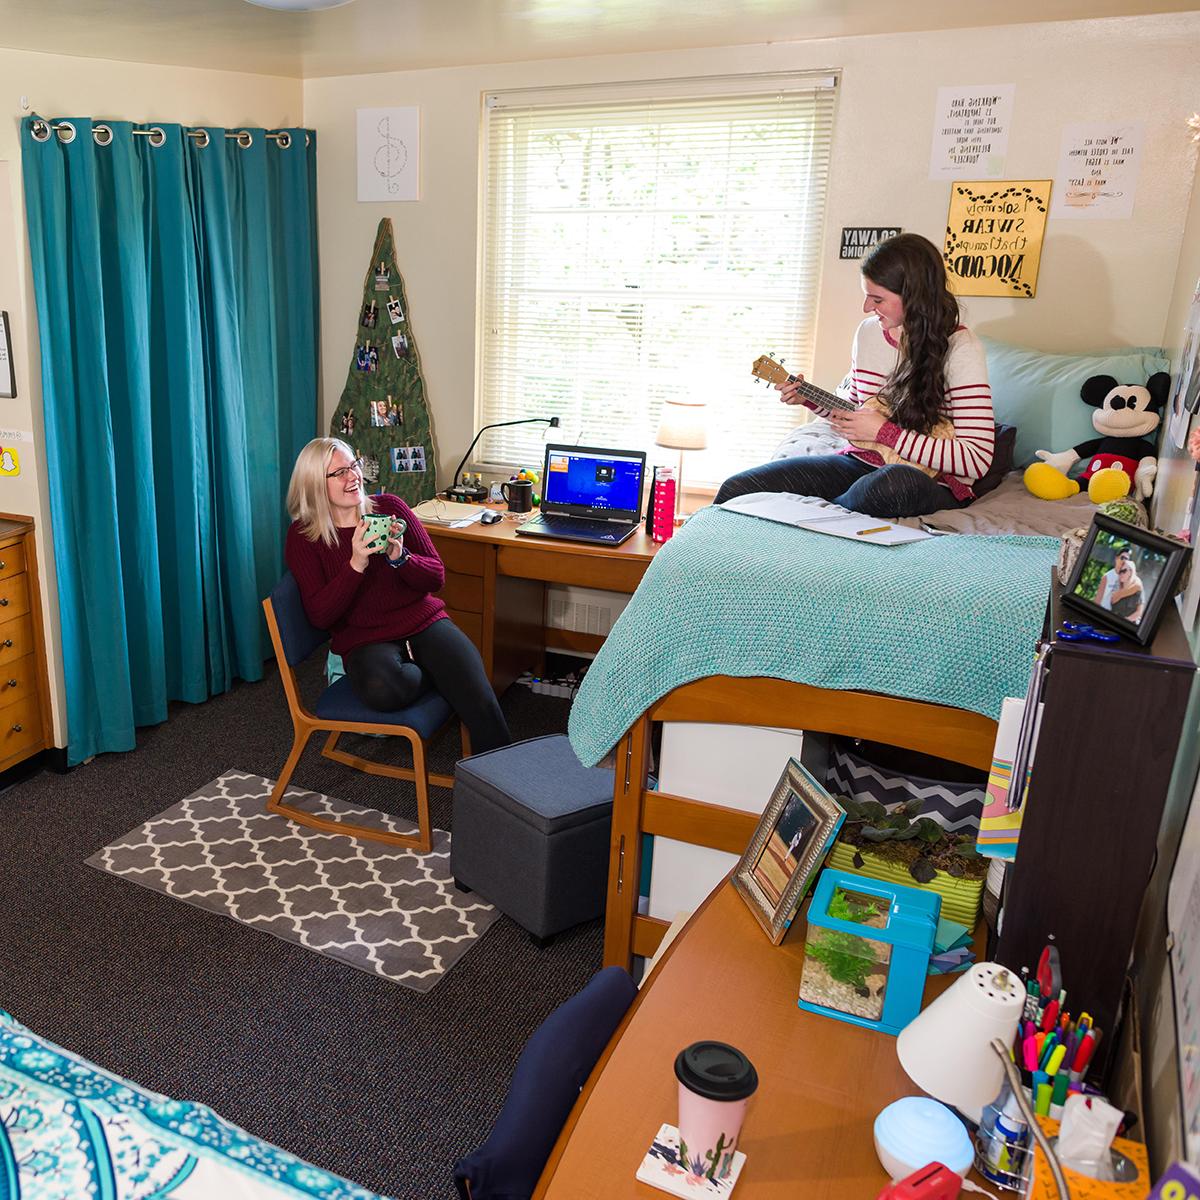 Photo of two roommates laughing and hanging out in their dorm room. One of them is playing a ukulele.